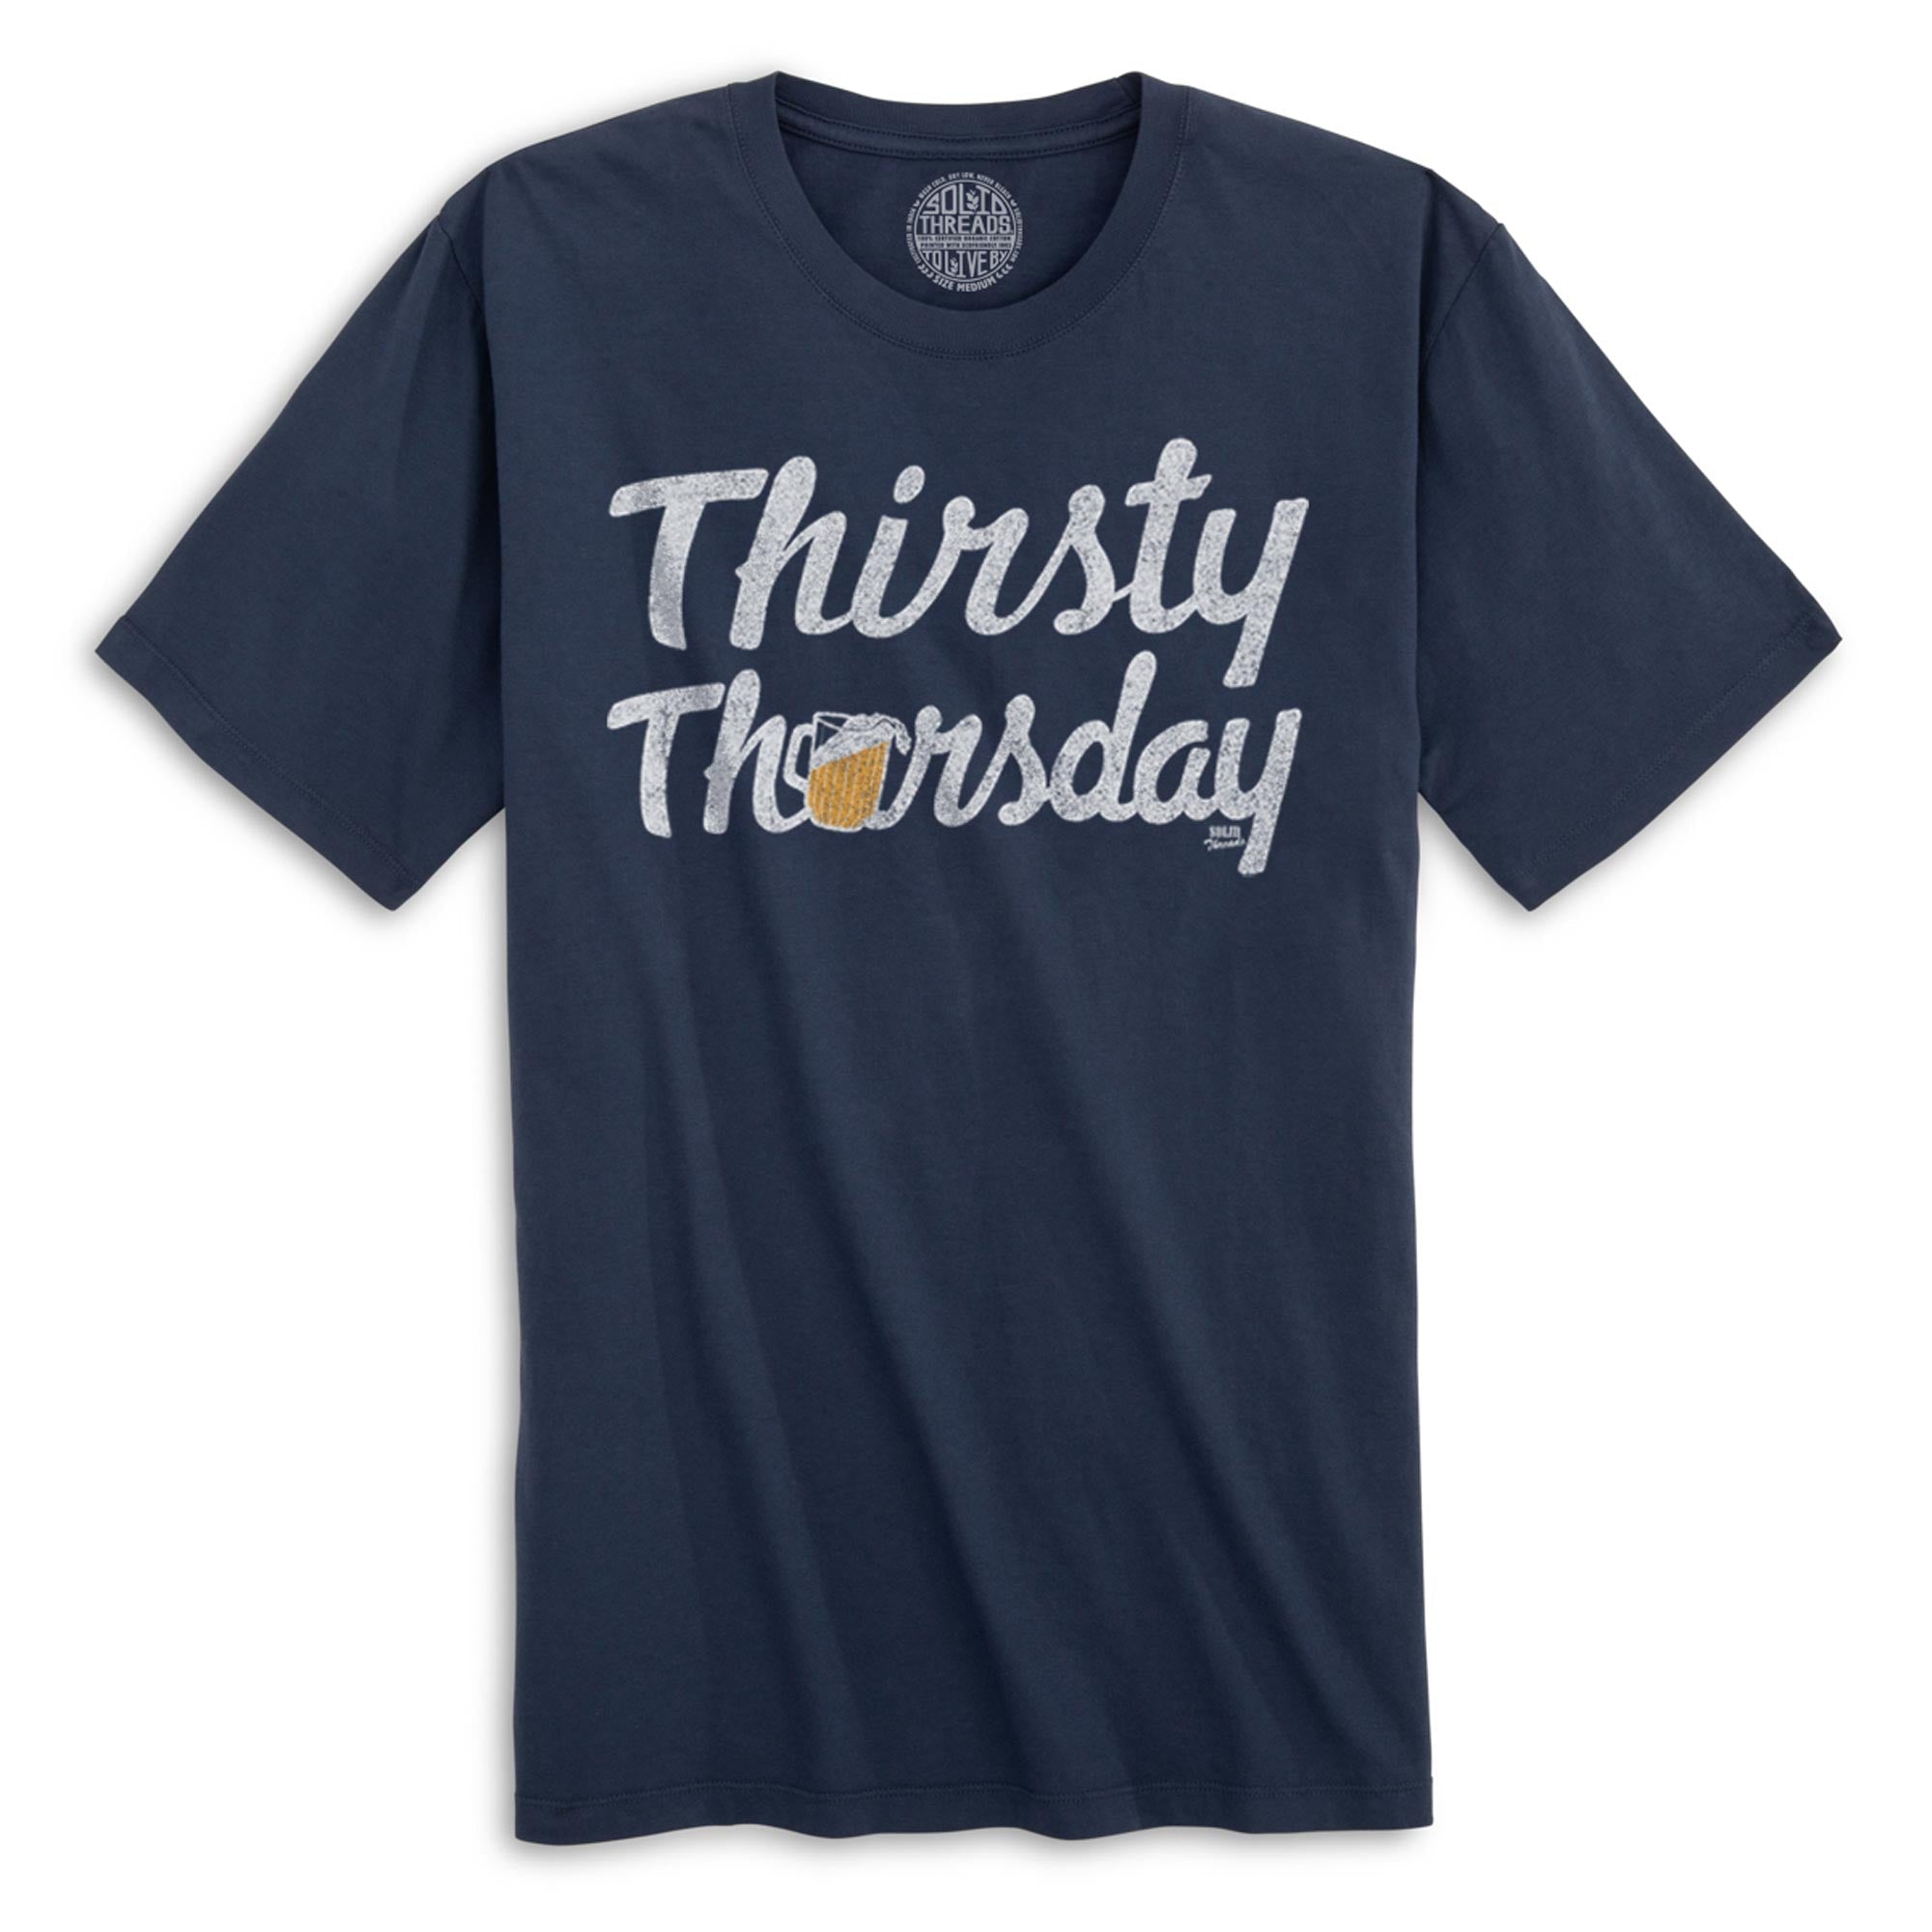 Thirsty Thursday Vintage Organic Cotton T-shirt | Funny Drinking   Tee | Solid Threads